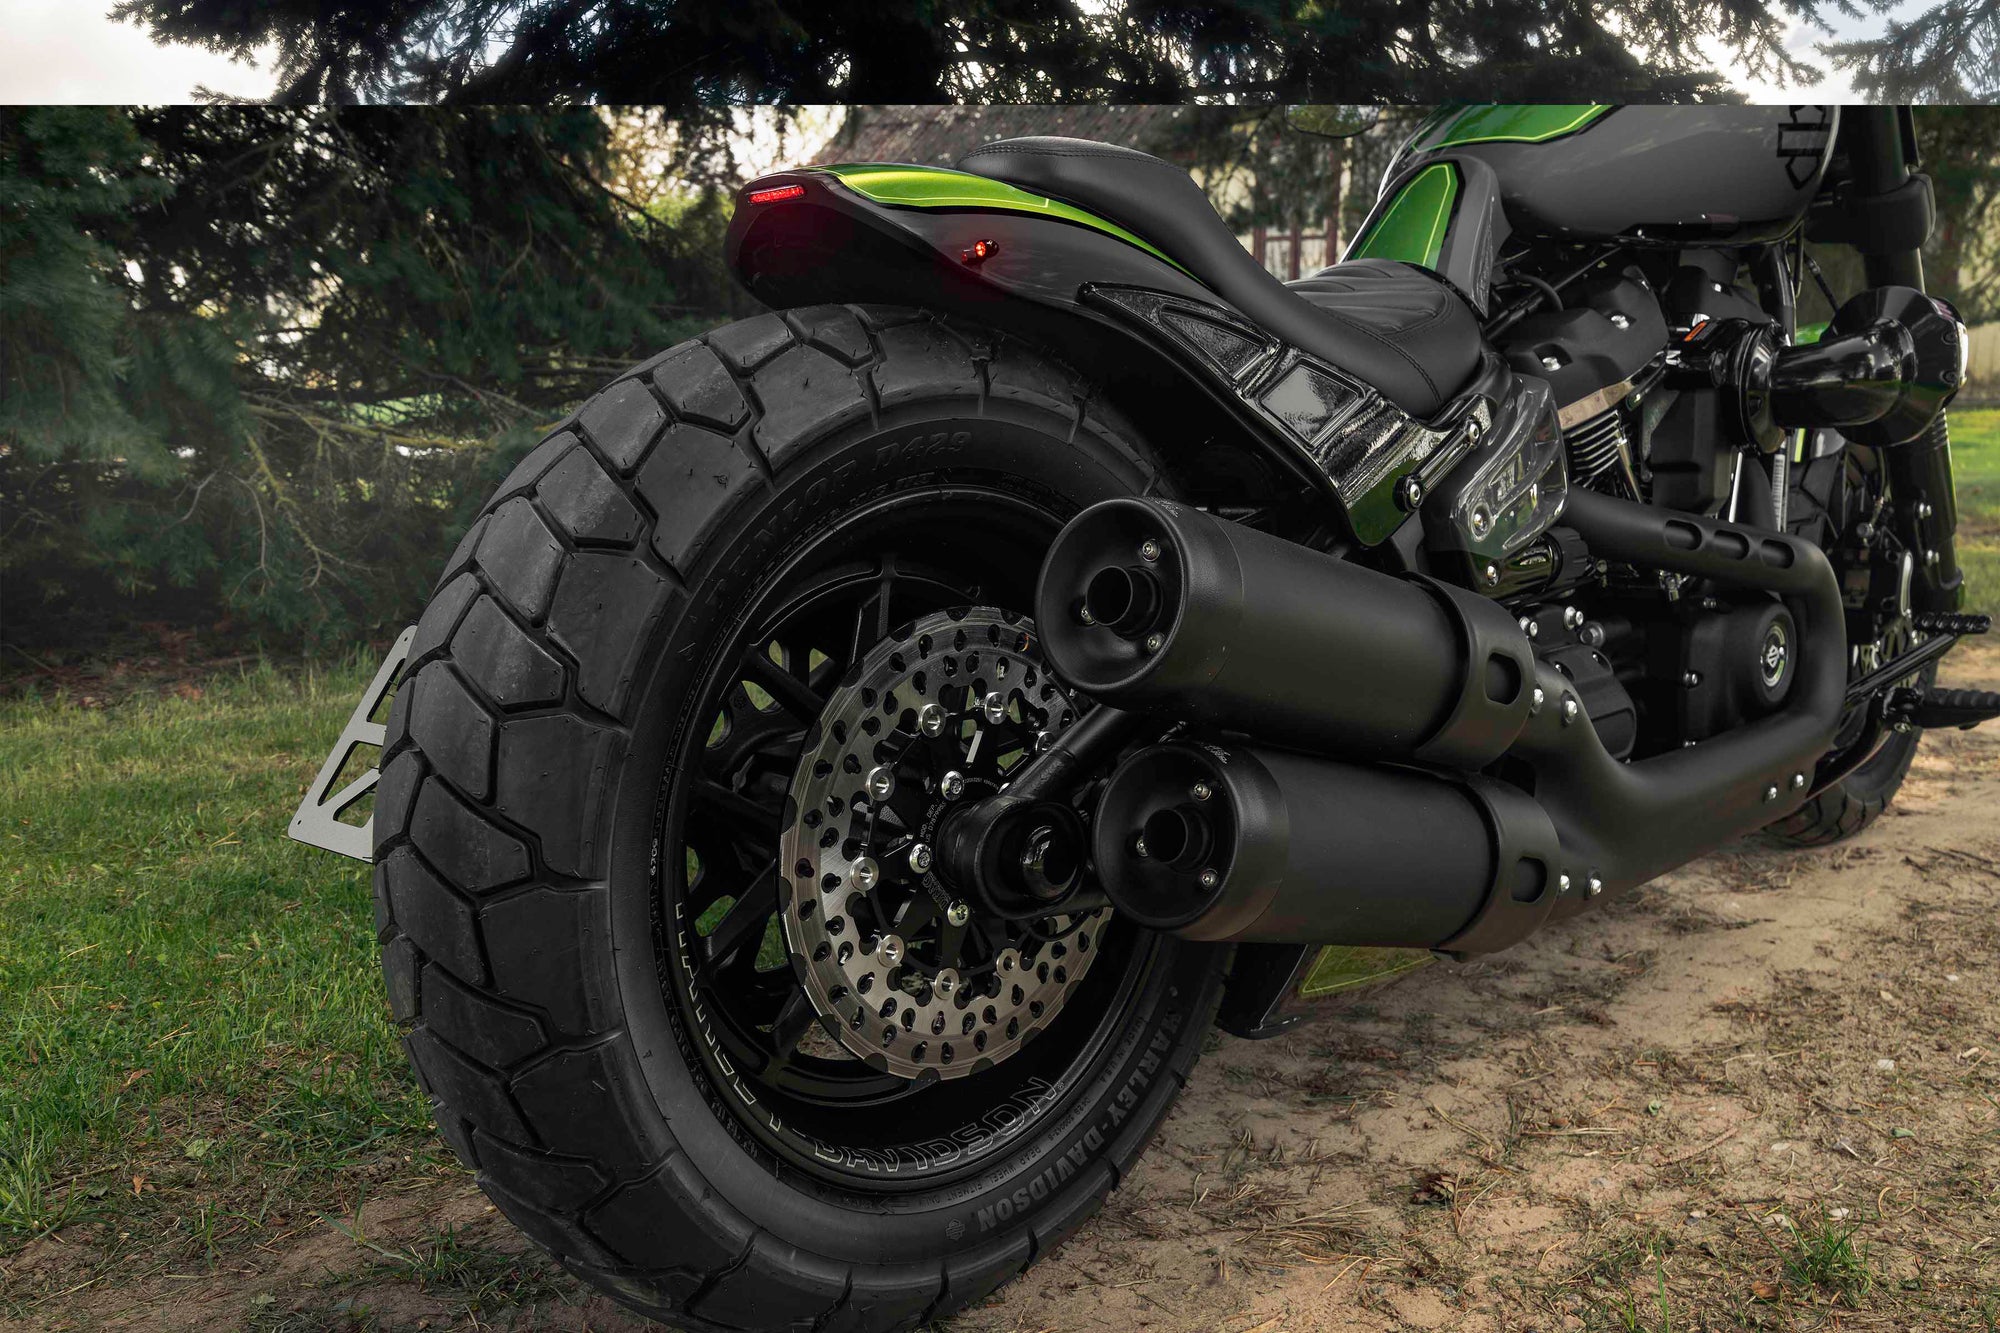 Zoomed Harley Davidson Fat Bob motorcycle with Killer Custom parts from the rear with some trees in the background